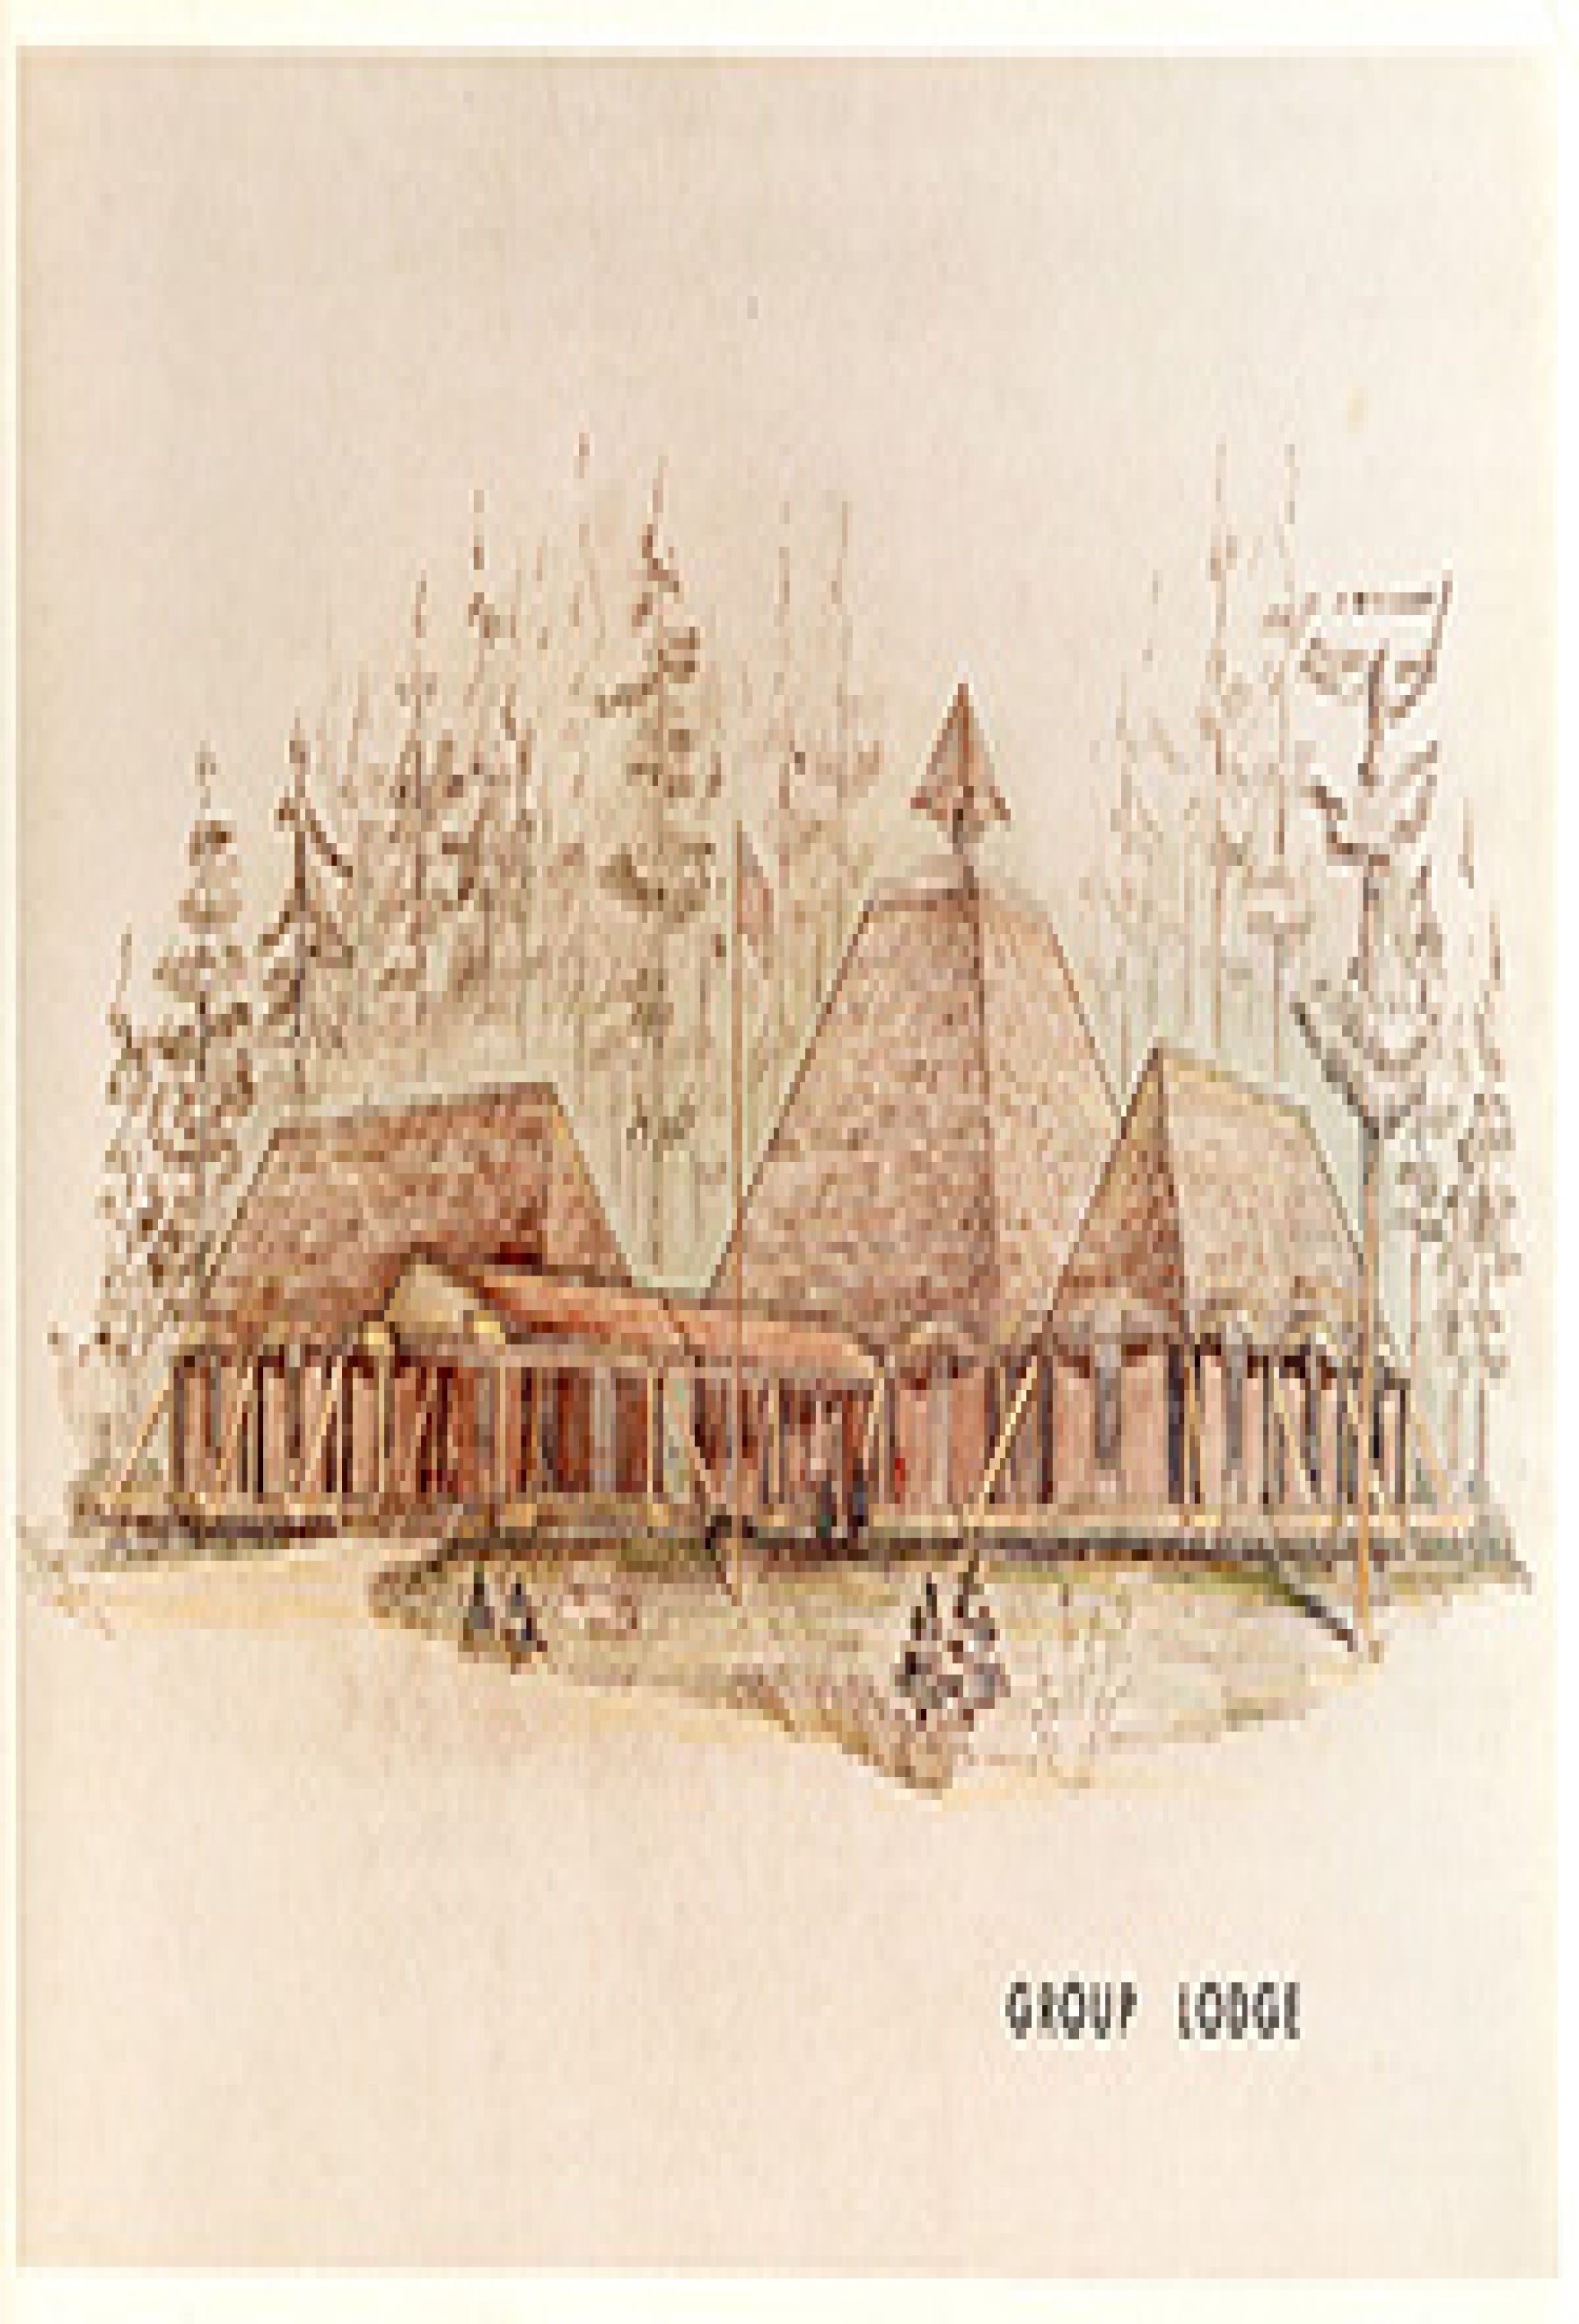 An illustration of the lodge at Camp Arrowhead surrounded by pine trees.